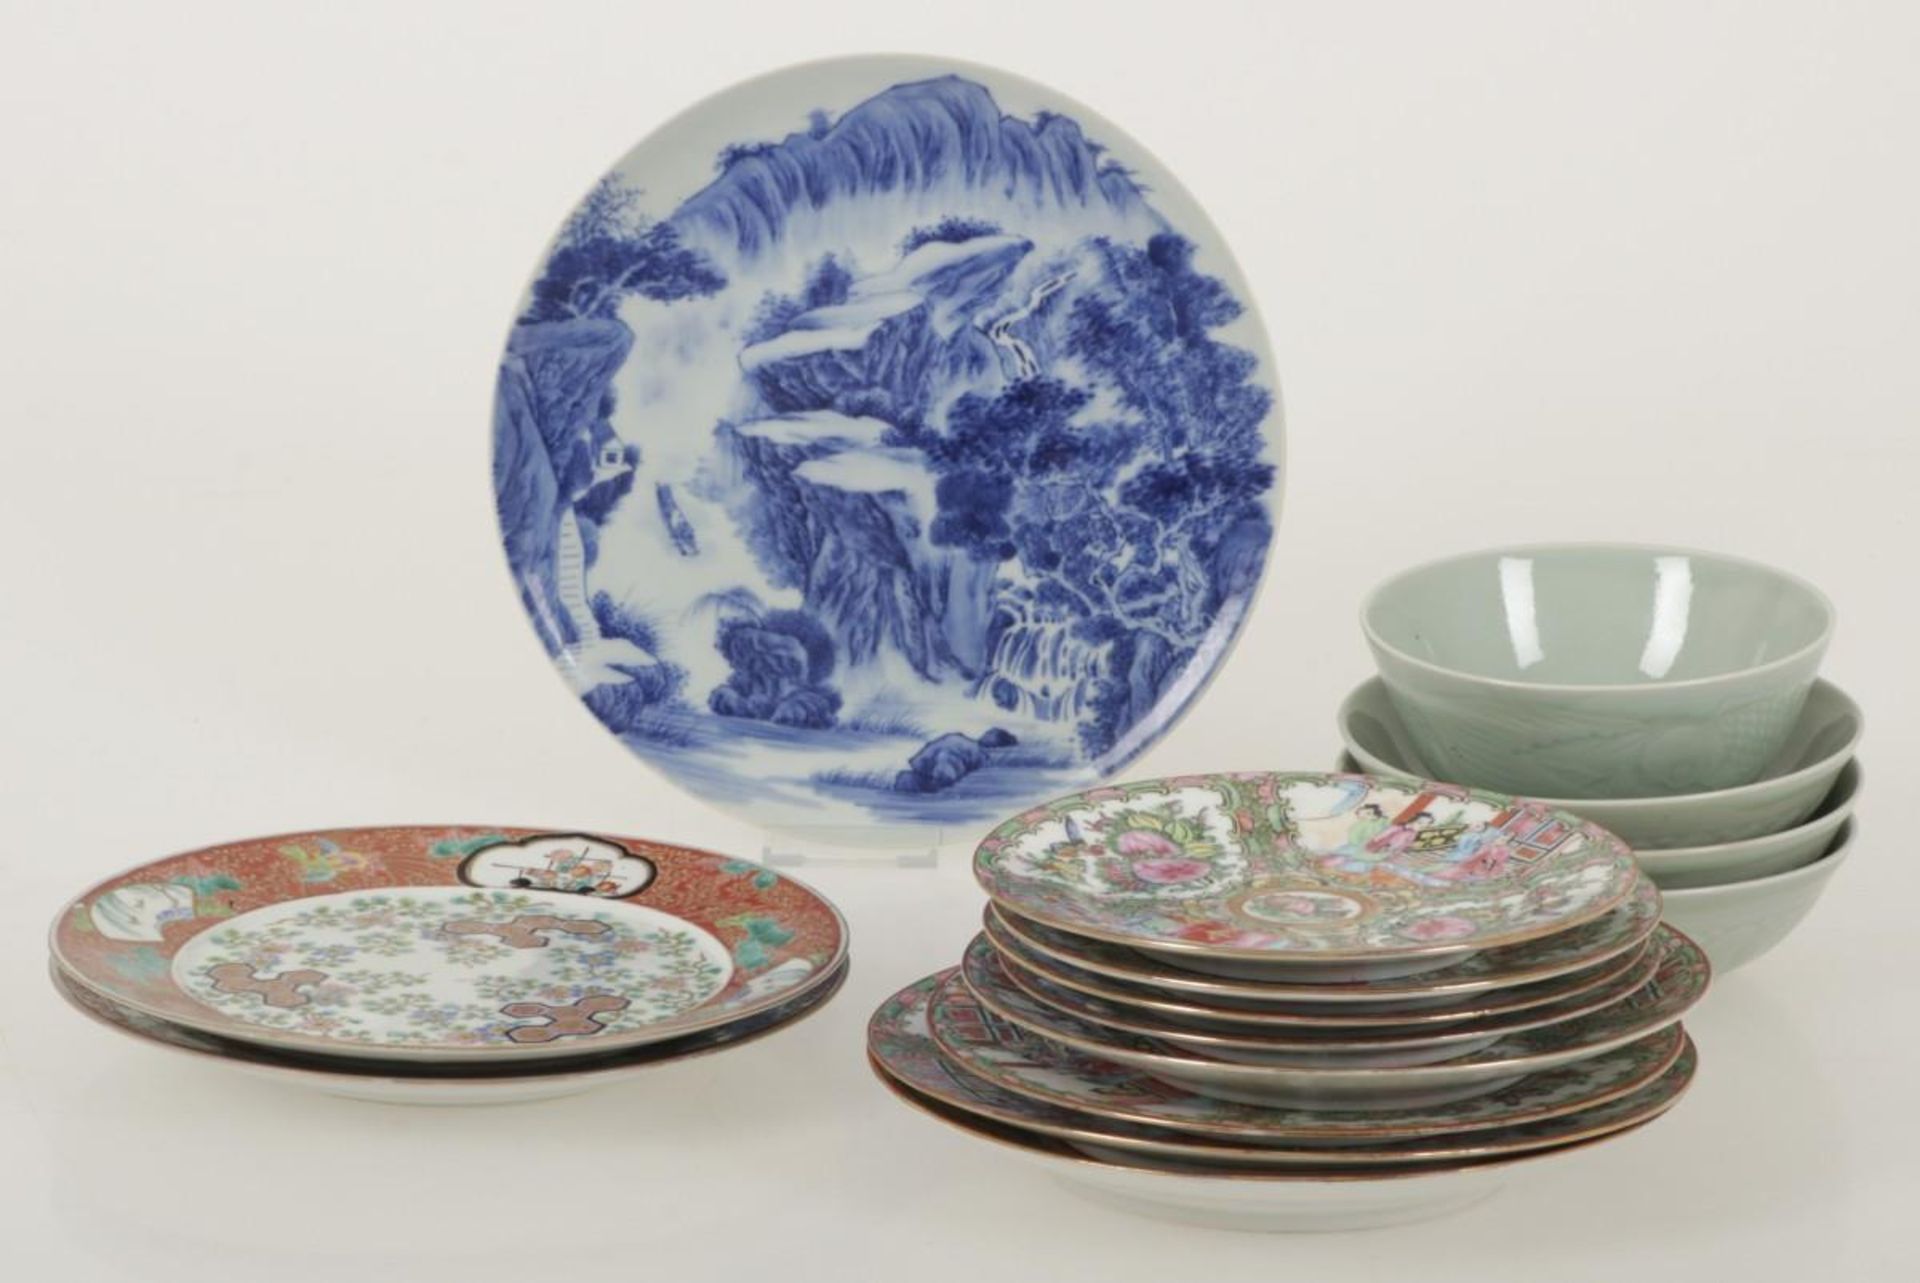 A large lot mixed porcelain Chinese plates and bowles.